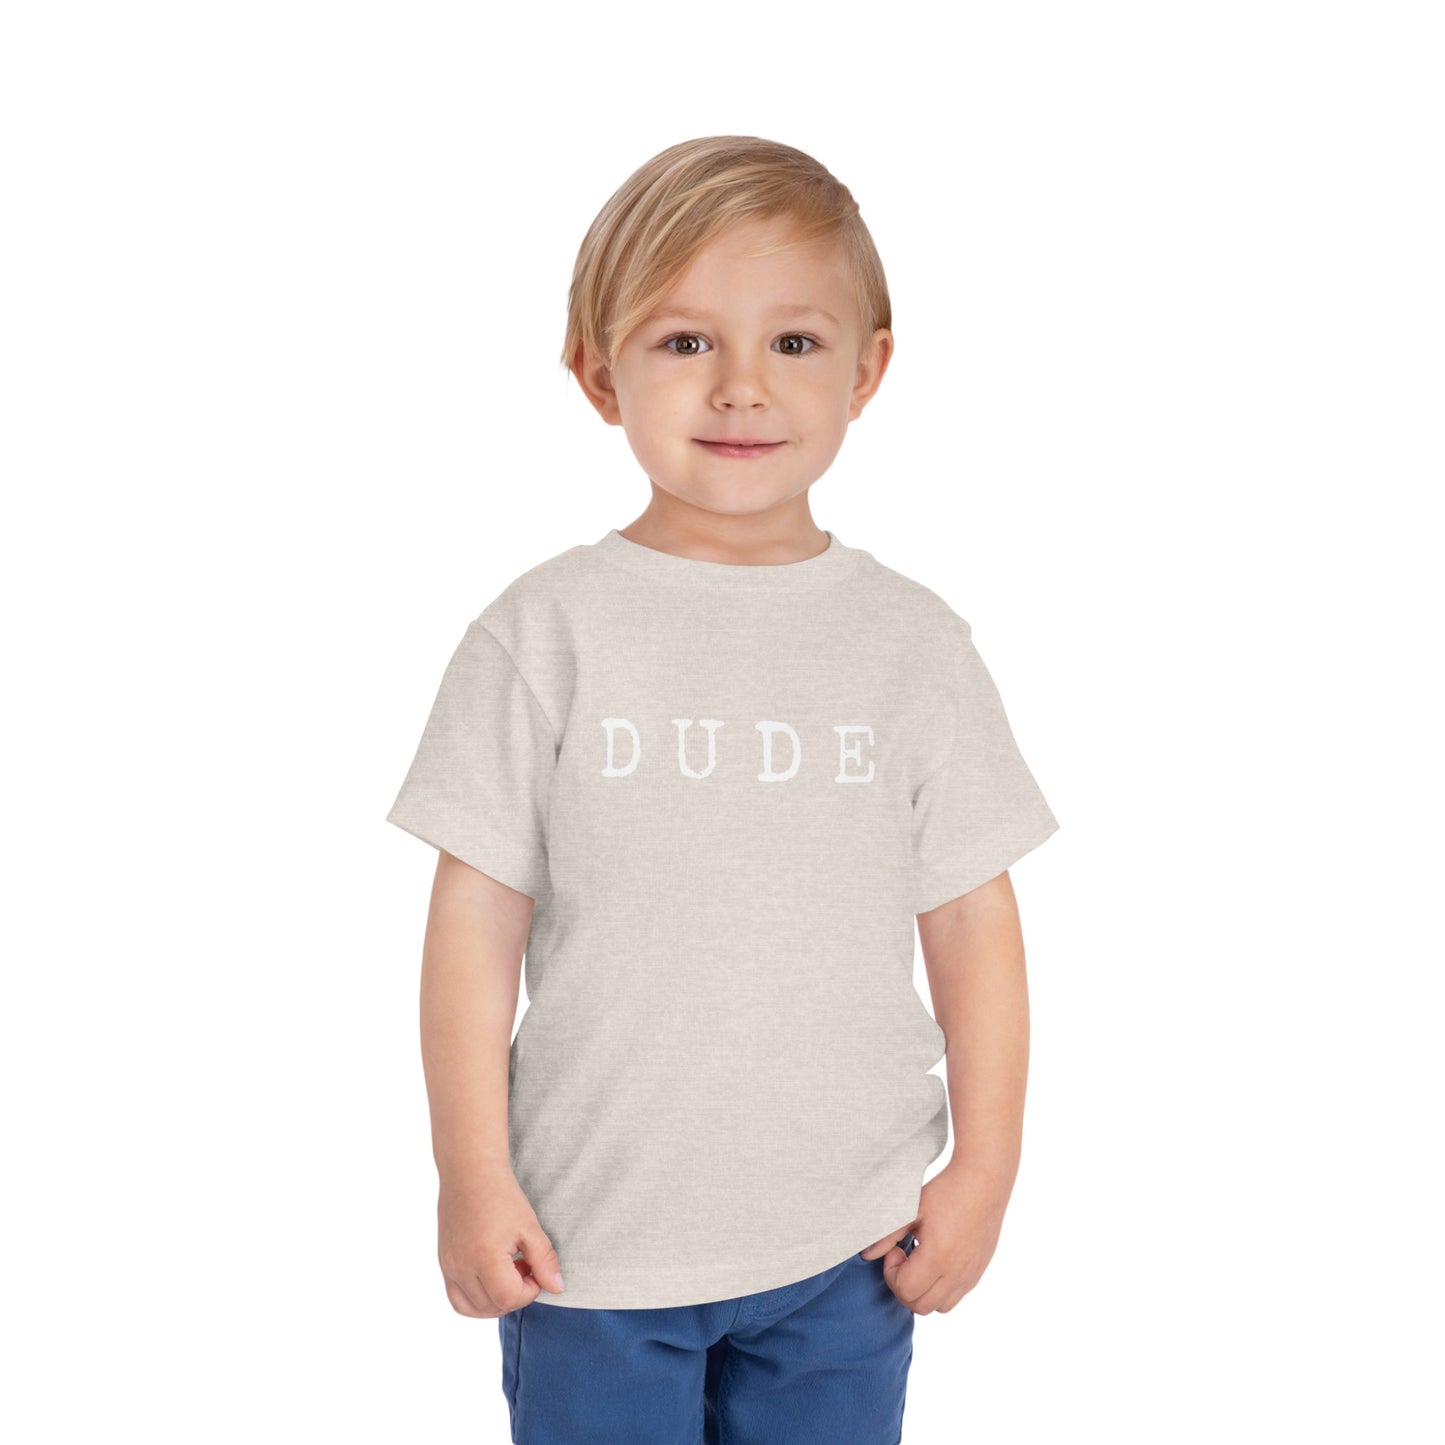 DUDE Toddler Heather Tee - Soft Airlume Cotton, Comfortable & Stylish